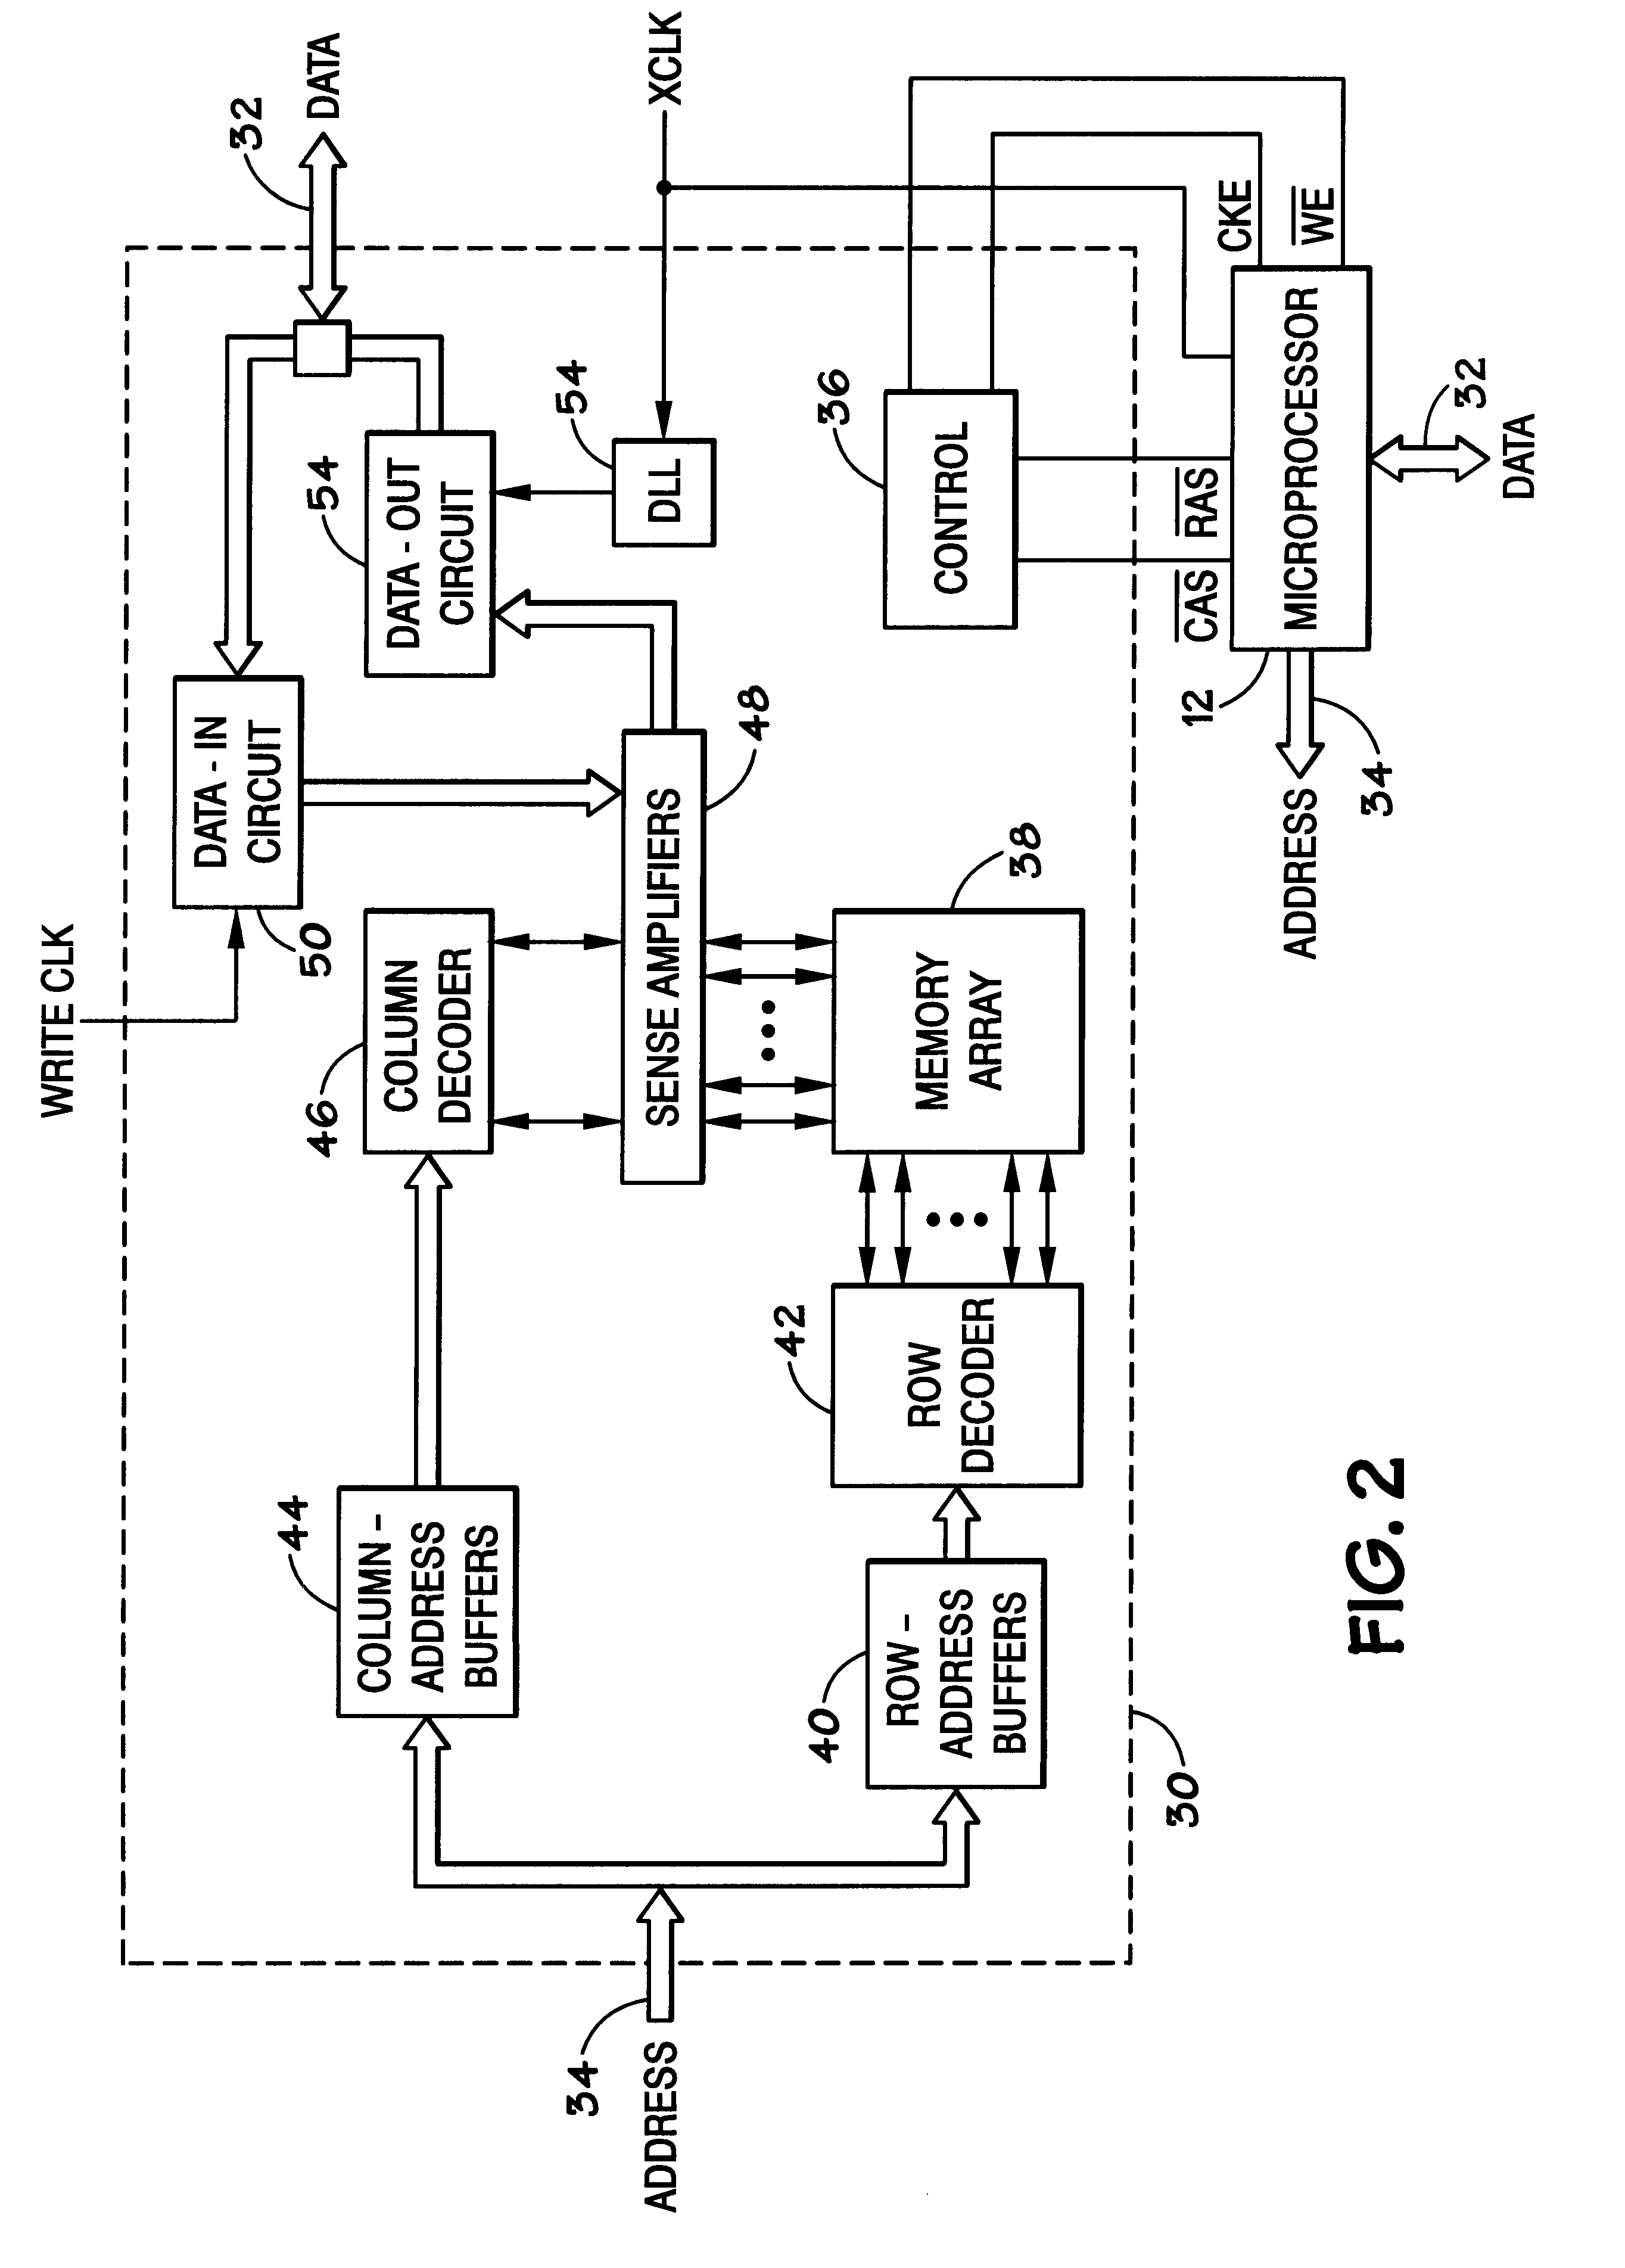 Method and apparatus for determining digital delay line entry point